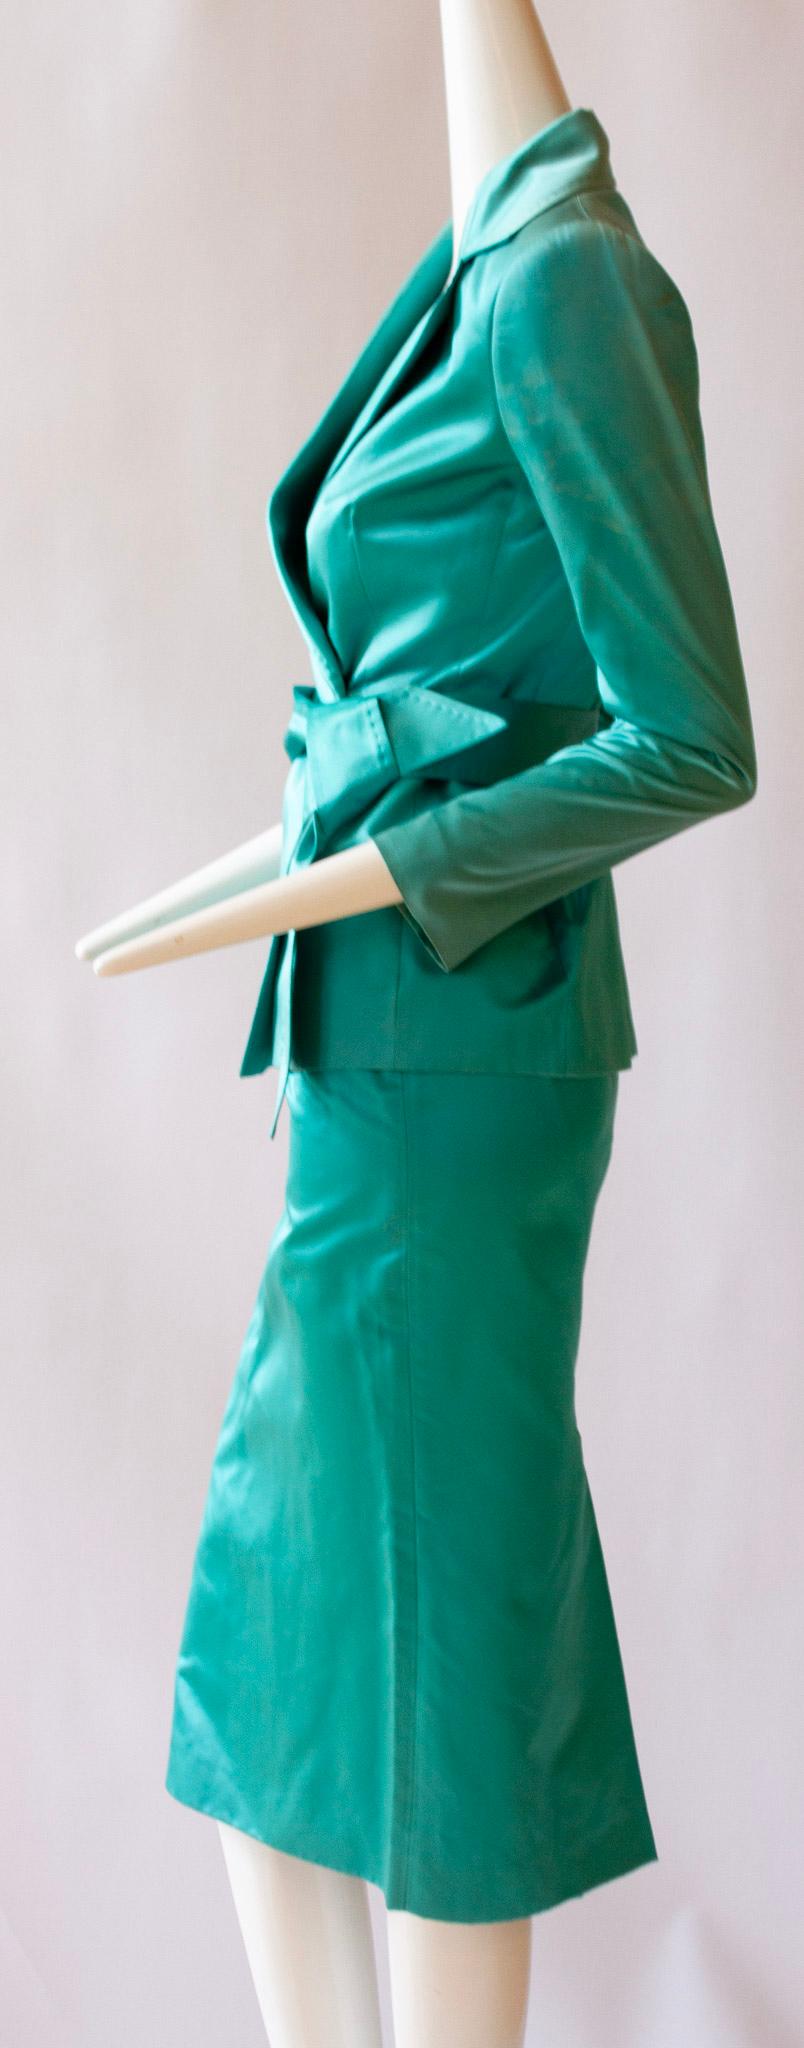 Dolce & Gabbana, Two Piece 100% Silk Turquoise Skirt Suit Ensemble  For Sale 2